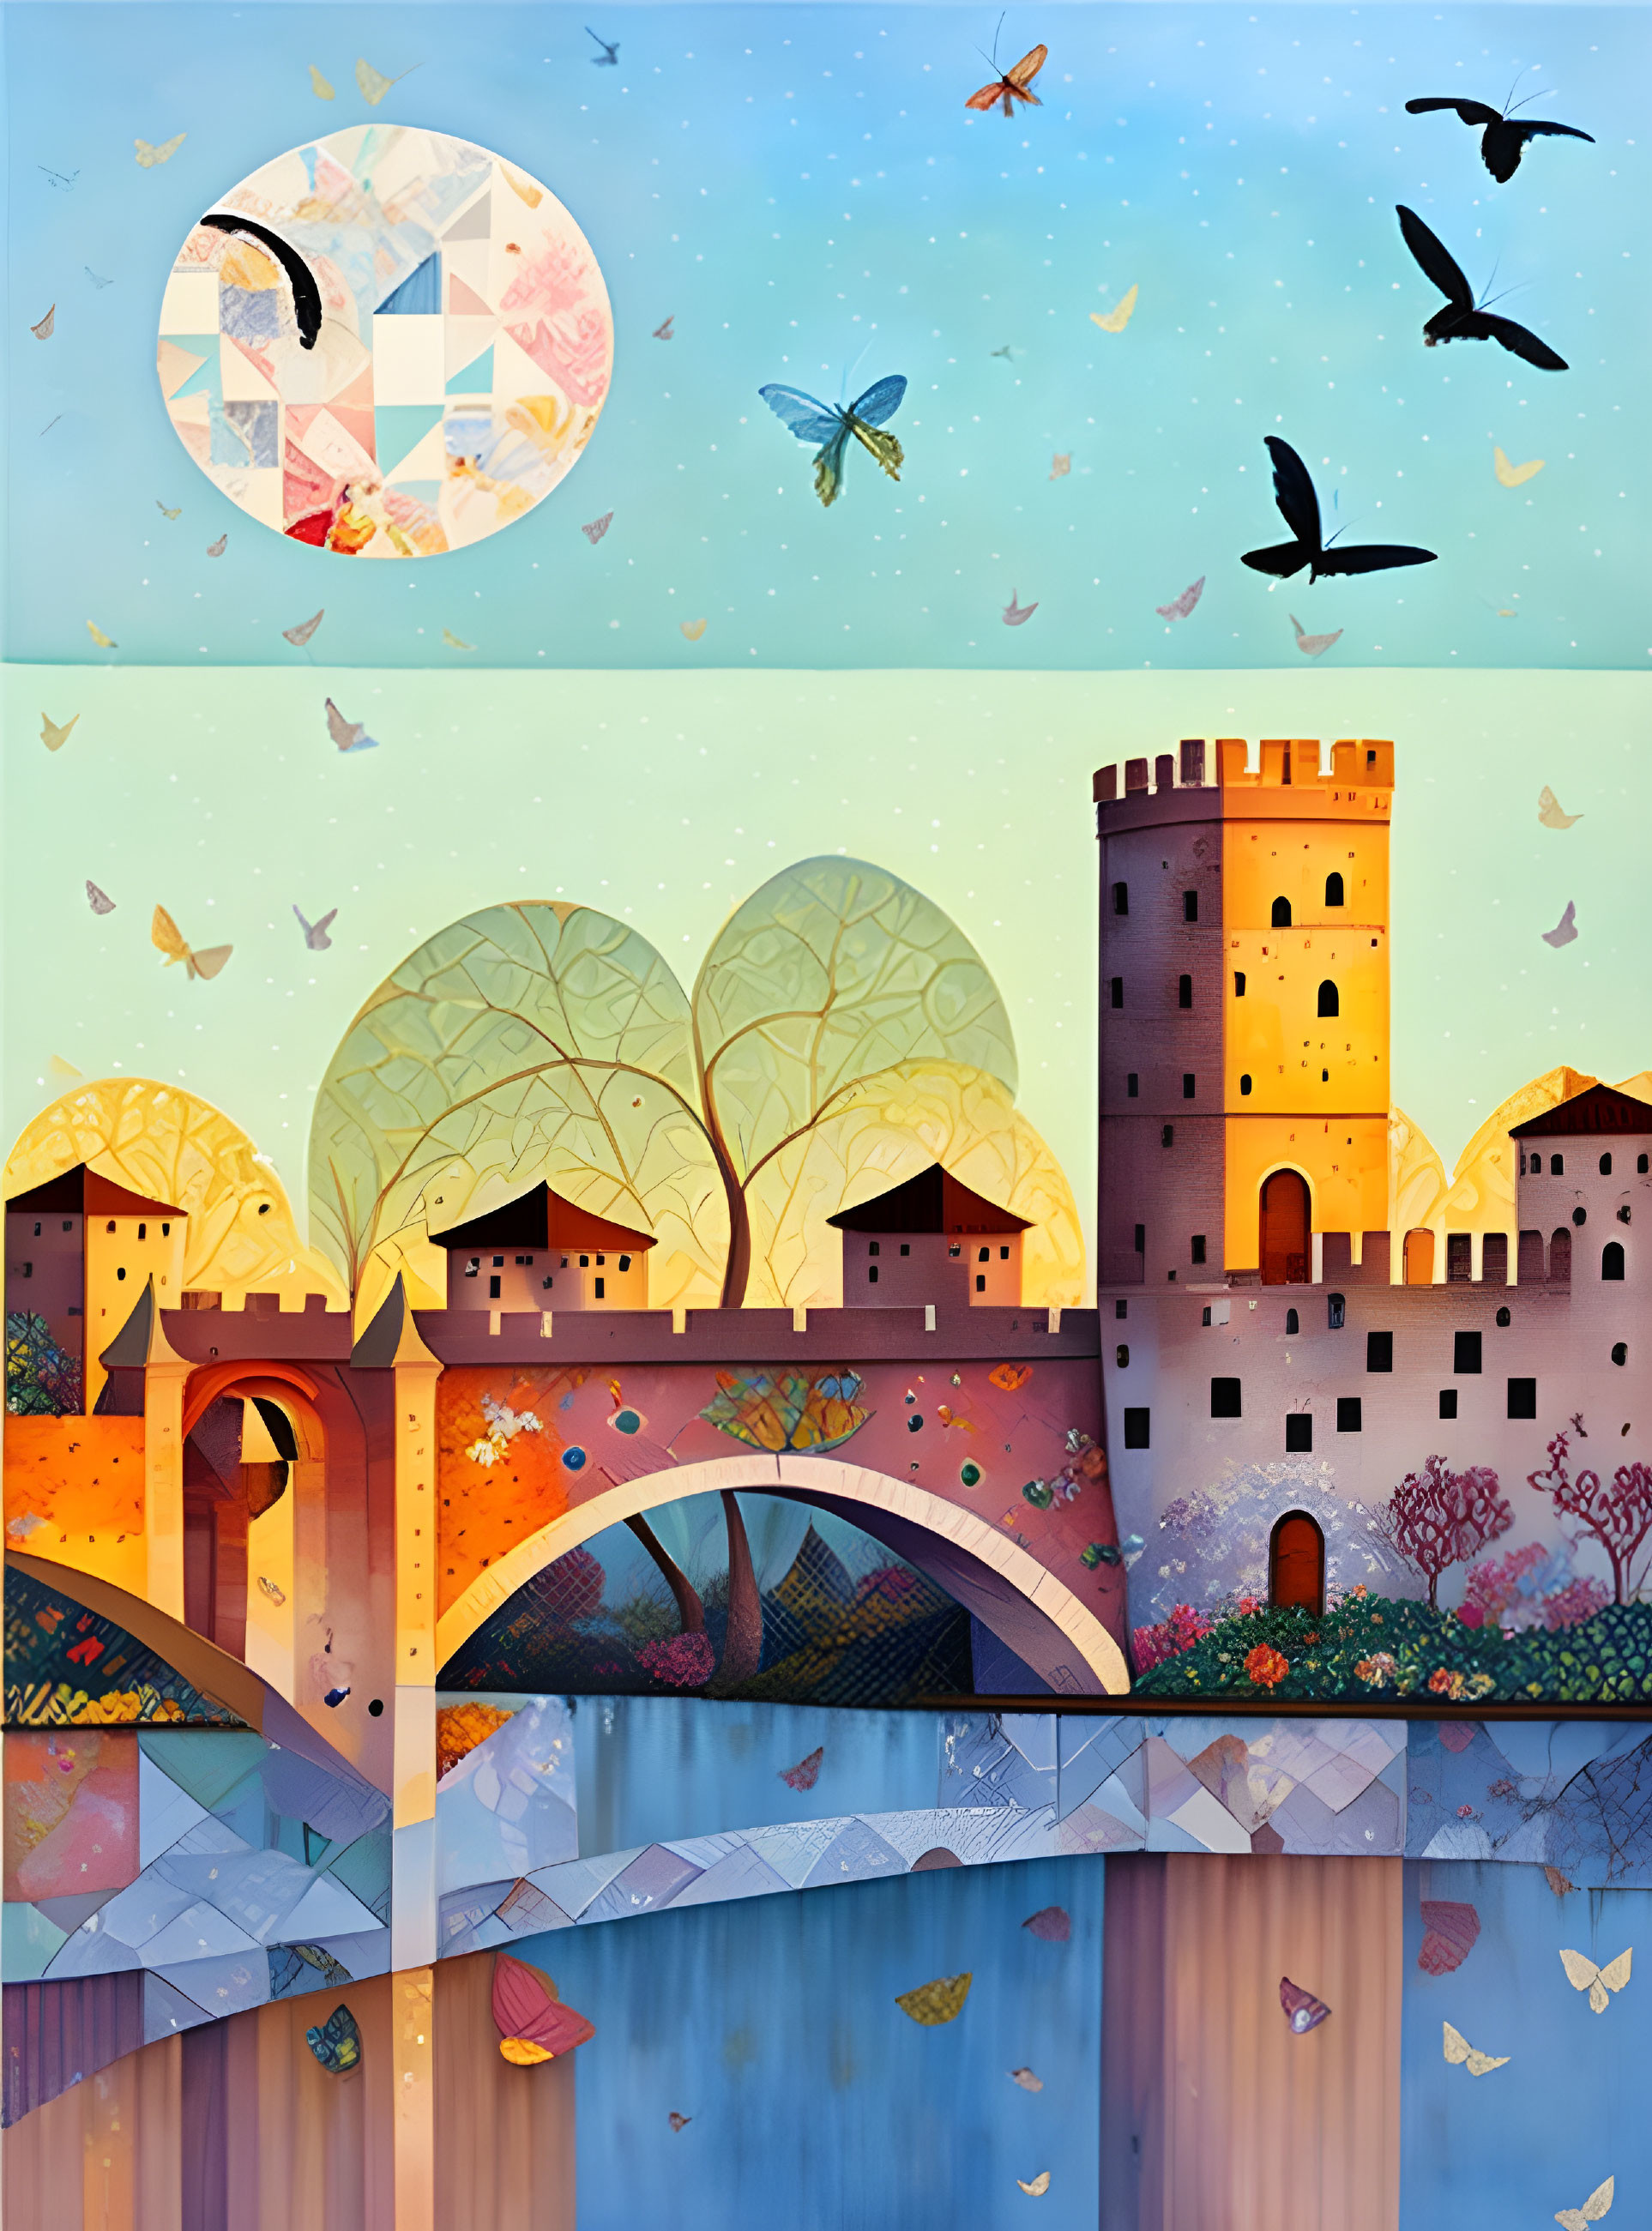 Colorful medieval tower and walls in sunlit illustration with trees, bridge, birds, butterflies, and